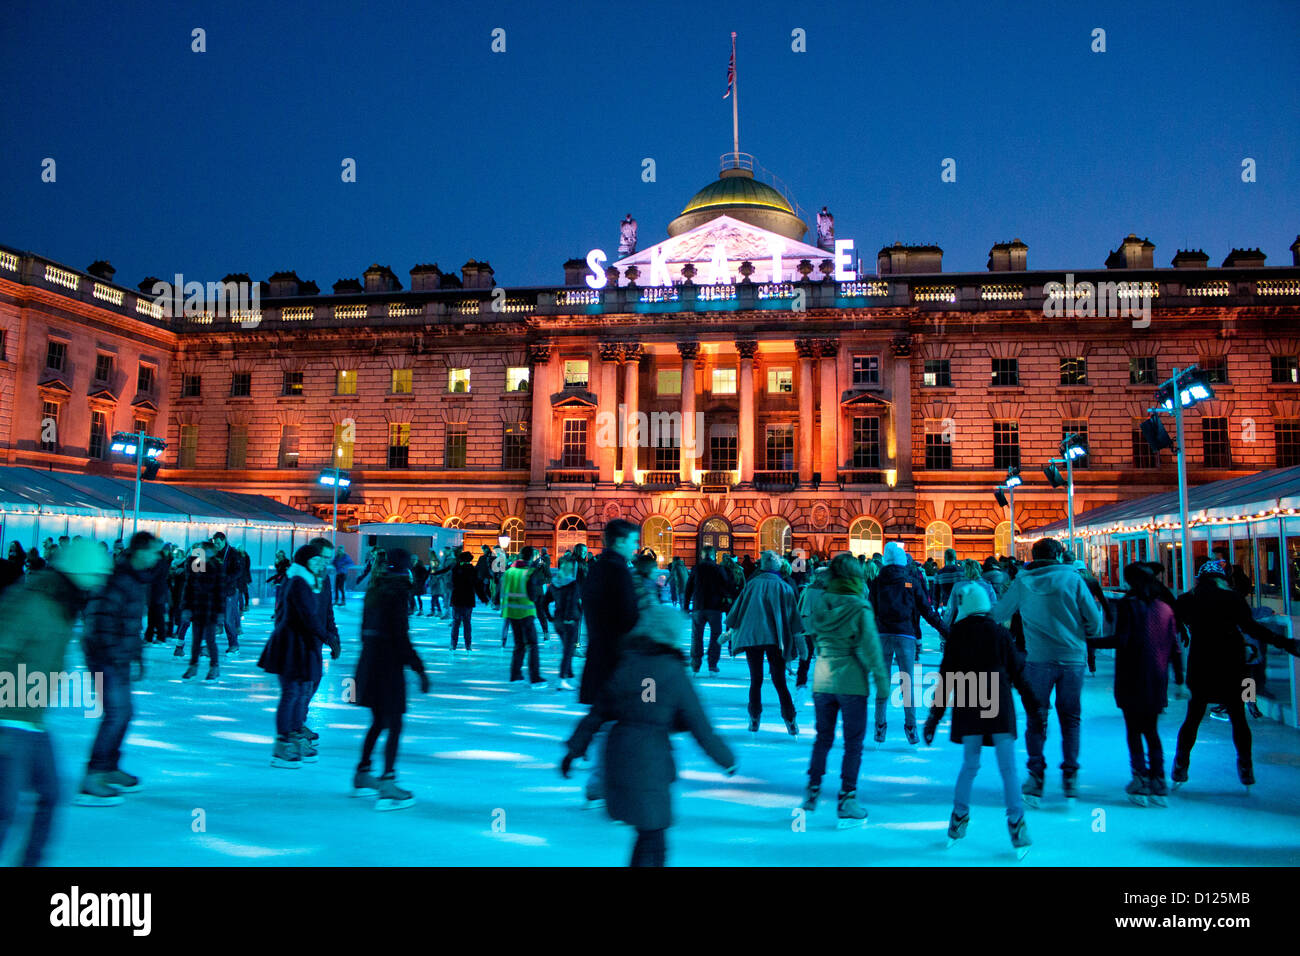 Les patineurs à glace Rink at Somerset House at night The Strand London England UK Banque D'Images